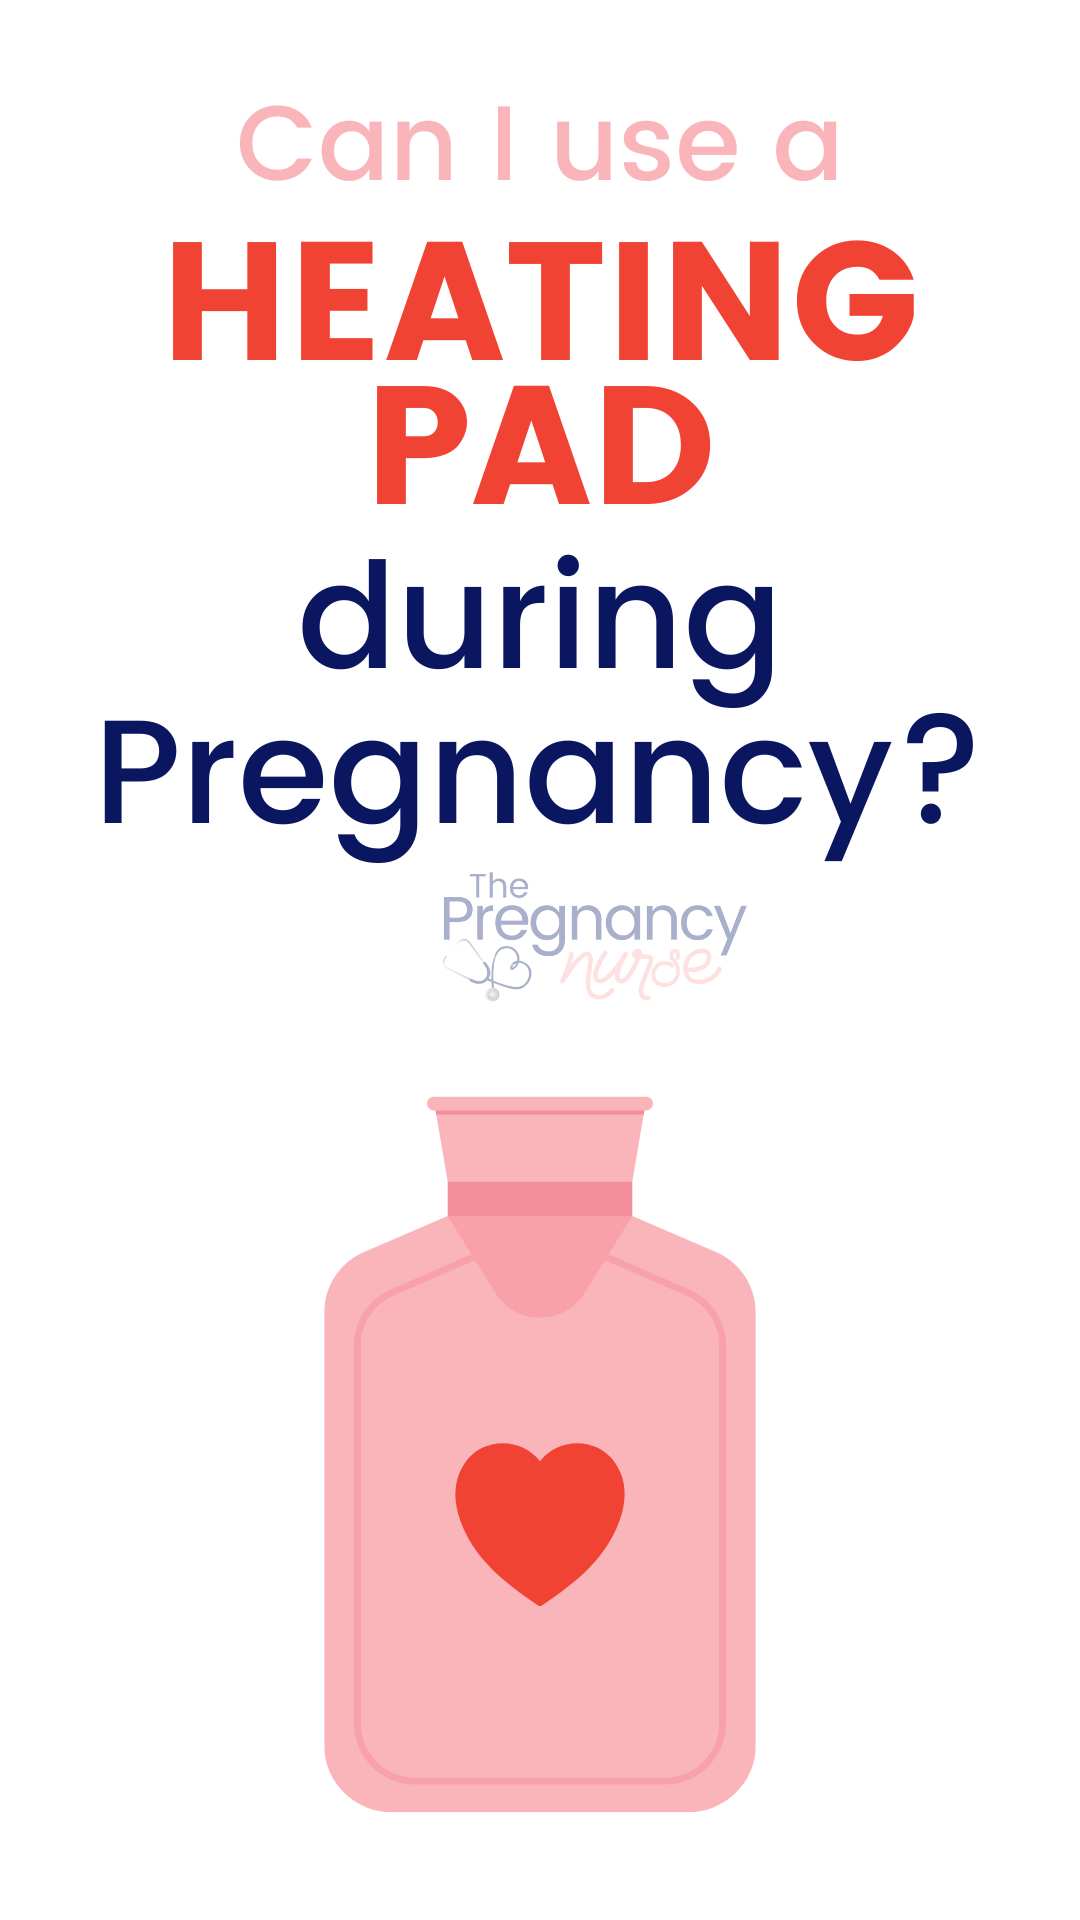 Pregnant women should always use caution when considering the use of any heating device, including a heating pad. While some mild heat may provide comfort to sore muscles and joints, pregnant women should understand potential risks and should always consult their healthcare provider before using a heating pad. It is important to use caution, as excessive heat can cause damage to the baby, as well as increase the mother's risk of developing certain pregnancy-related conditions.